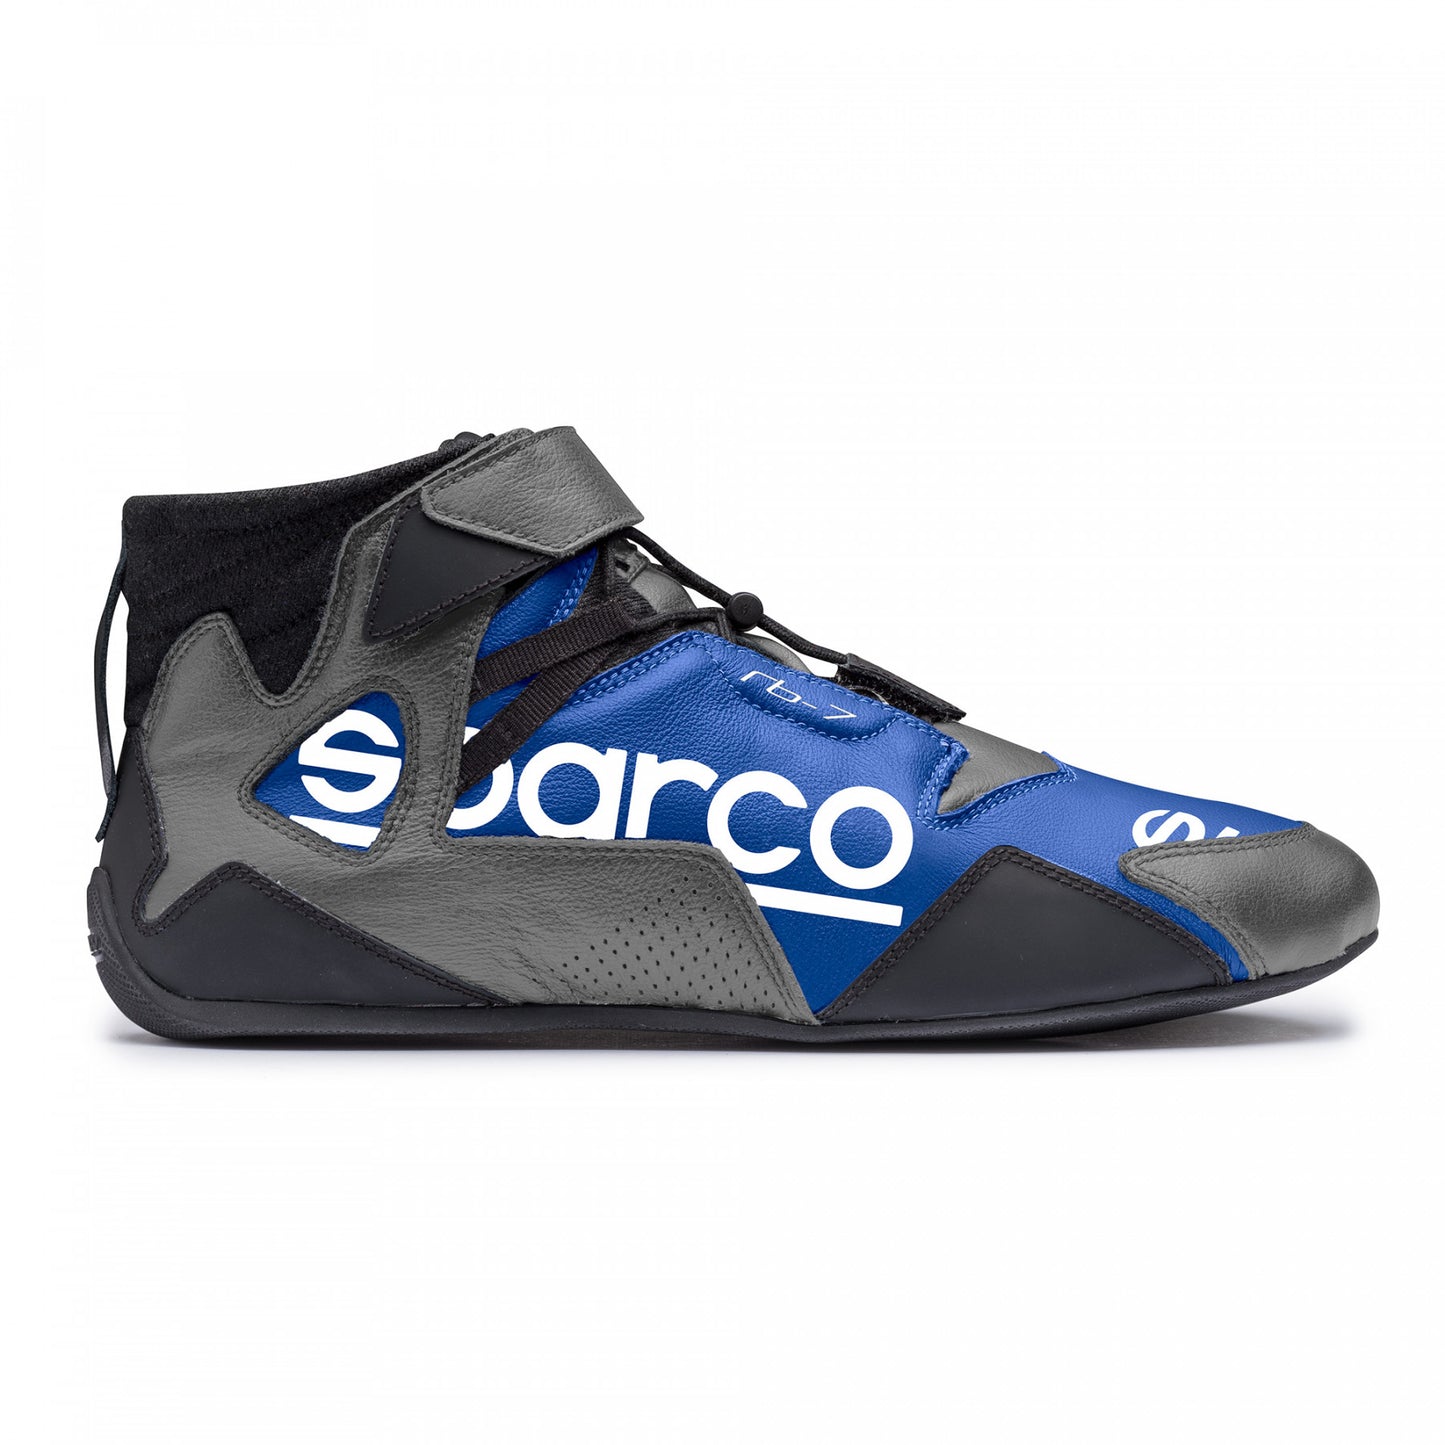 "STOCK DEAL" SPARCO APEX RB-7 / Size 42/ US 9